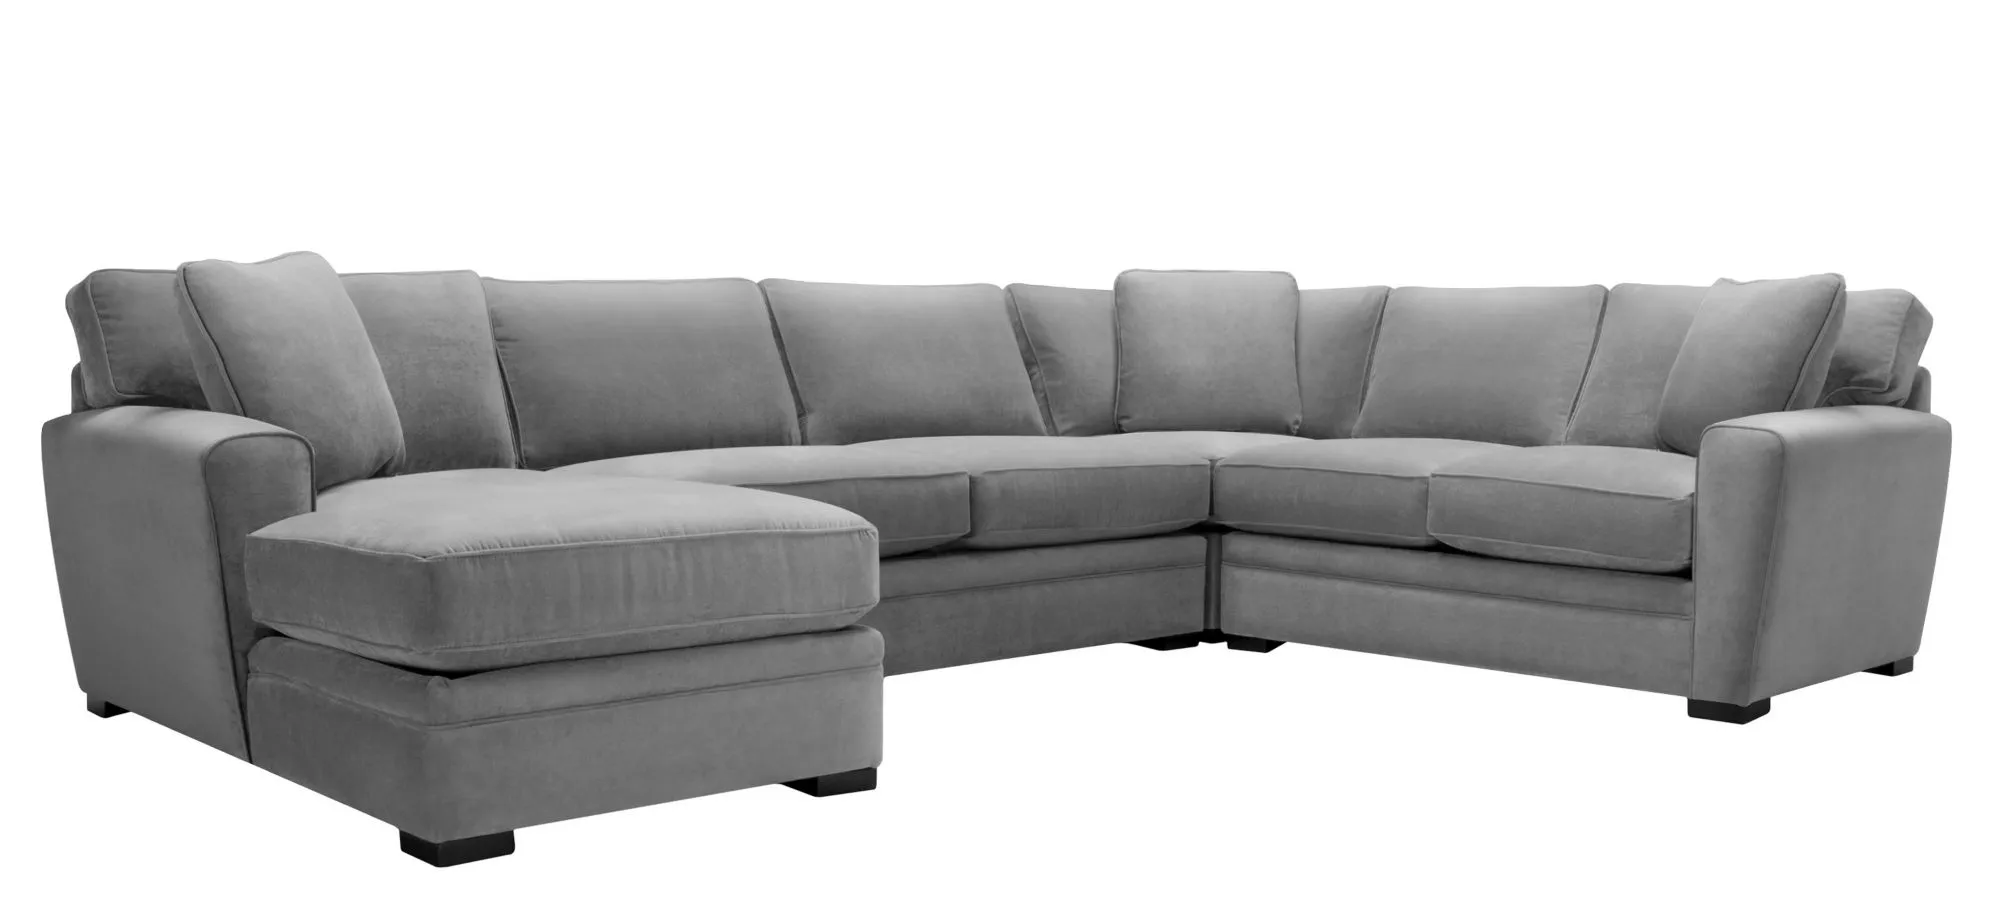 Artemis II 4-pc. Left Hand Facing Sectional Sofa in Gypsy Smoked Pearl by Jonathan Louis